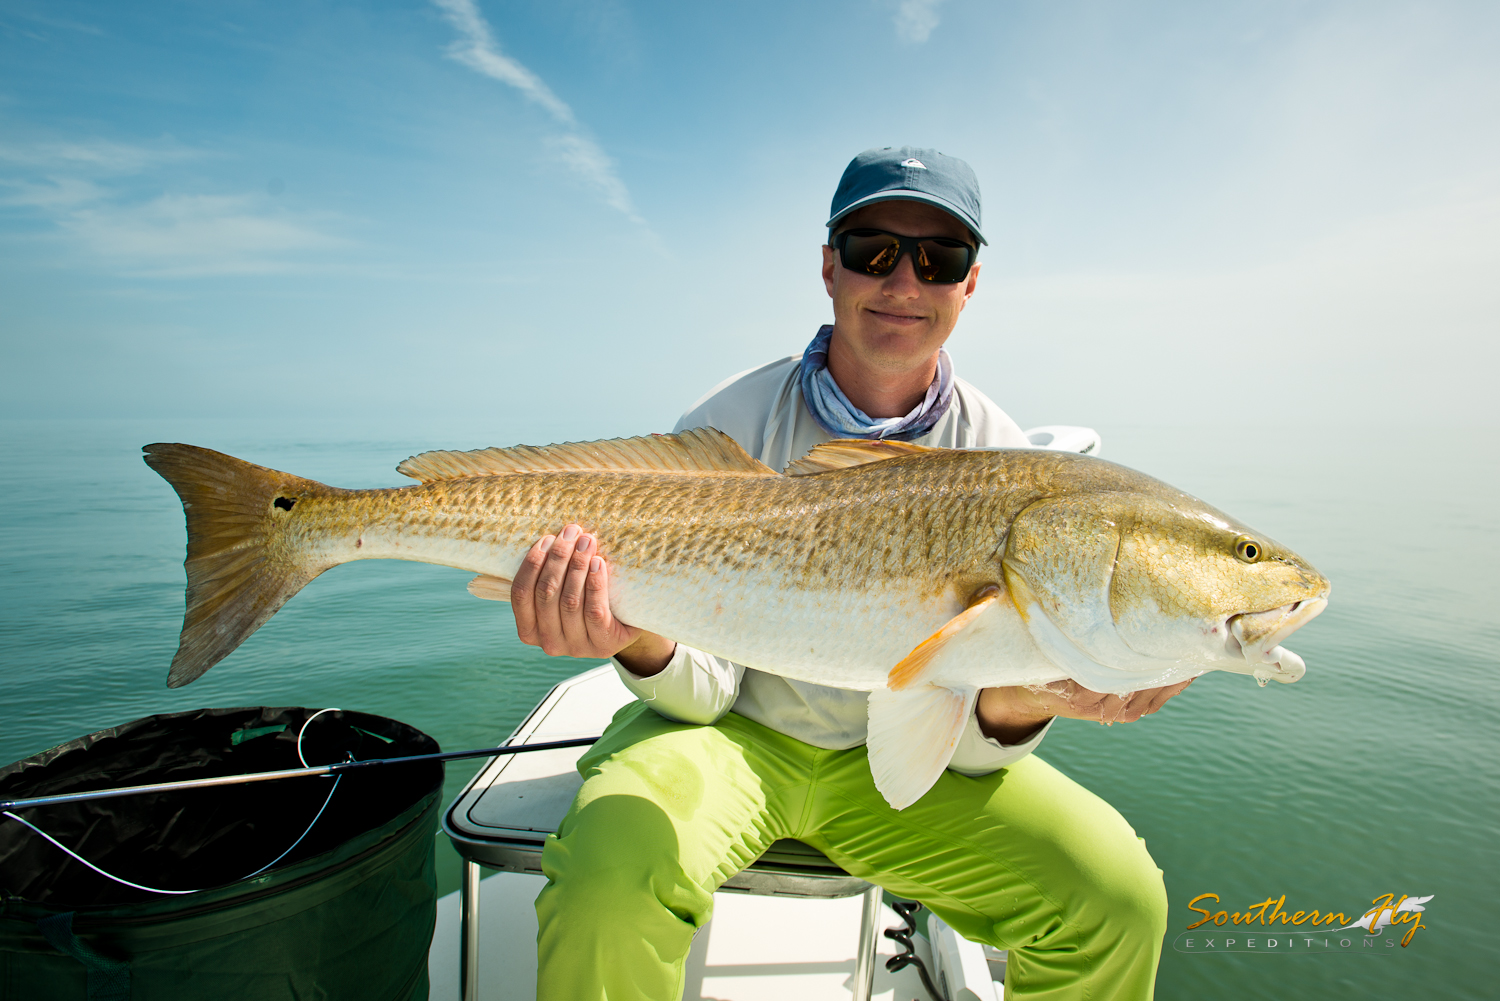 Sight Fly Fishing Guide Louisiana Southern Fly Expeditions